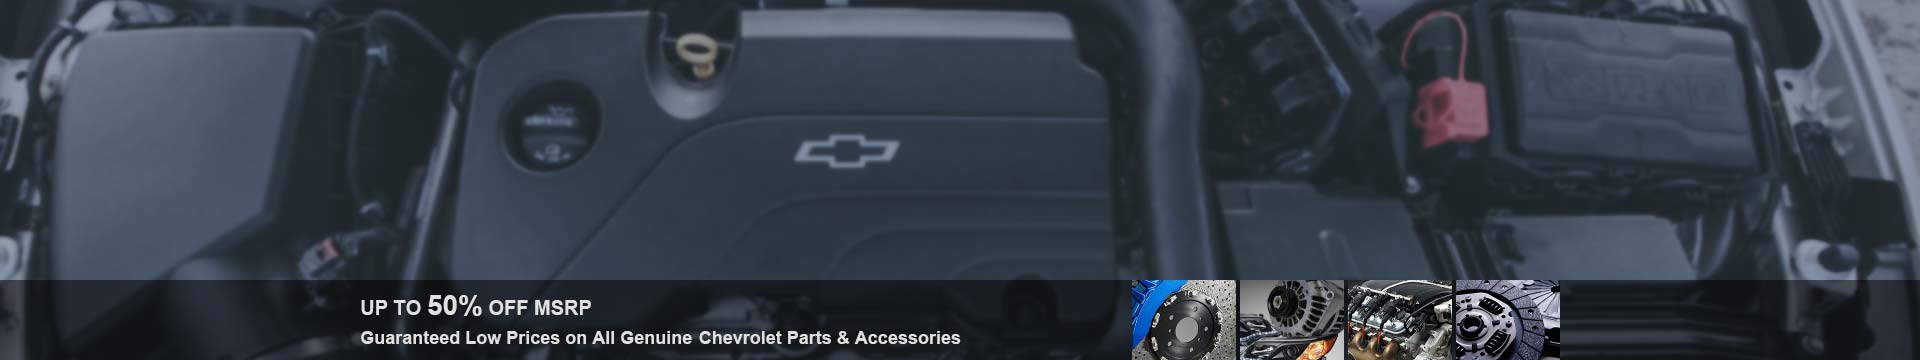 Guaranteed low prices on all Genuine Chevrolet Avalanche parts